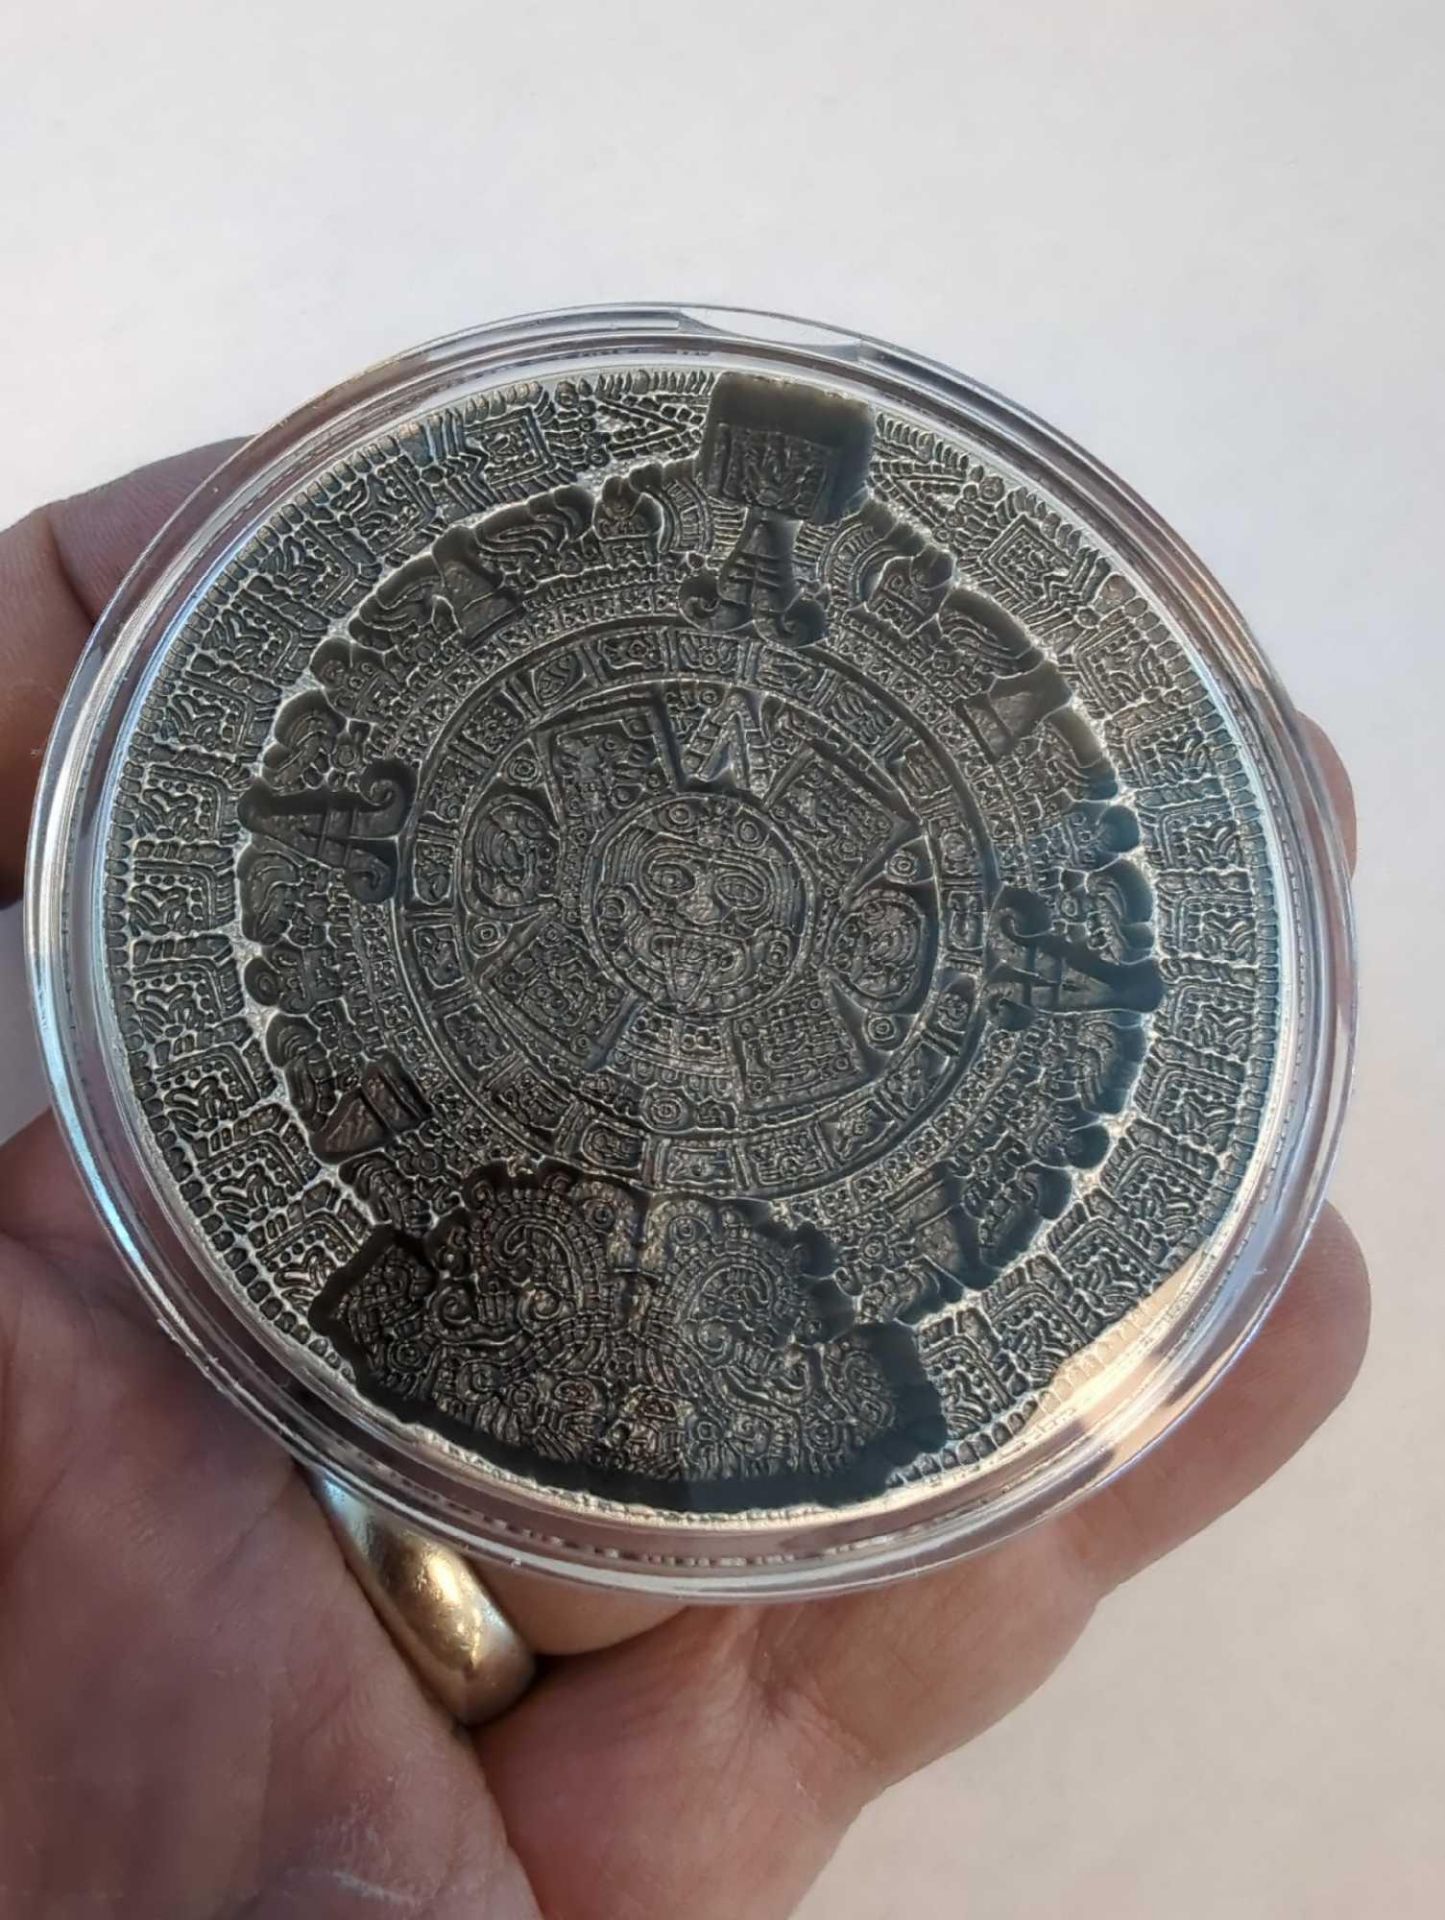 2022 South Korea 2-oz Silver Aztec Sun Stone High Relief Stacker Medal w/Antique Finish - Image 2 of 4